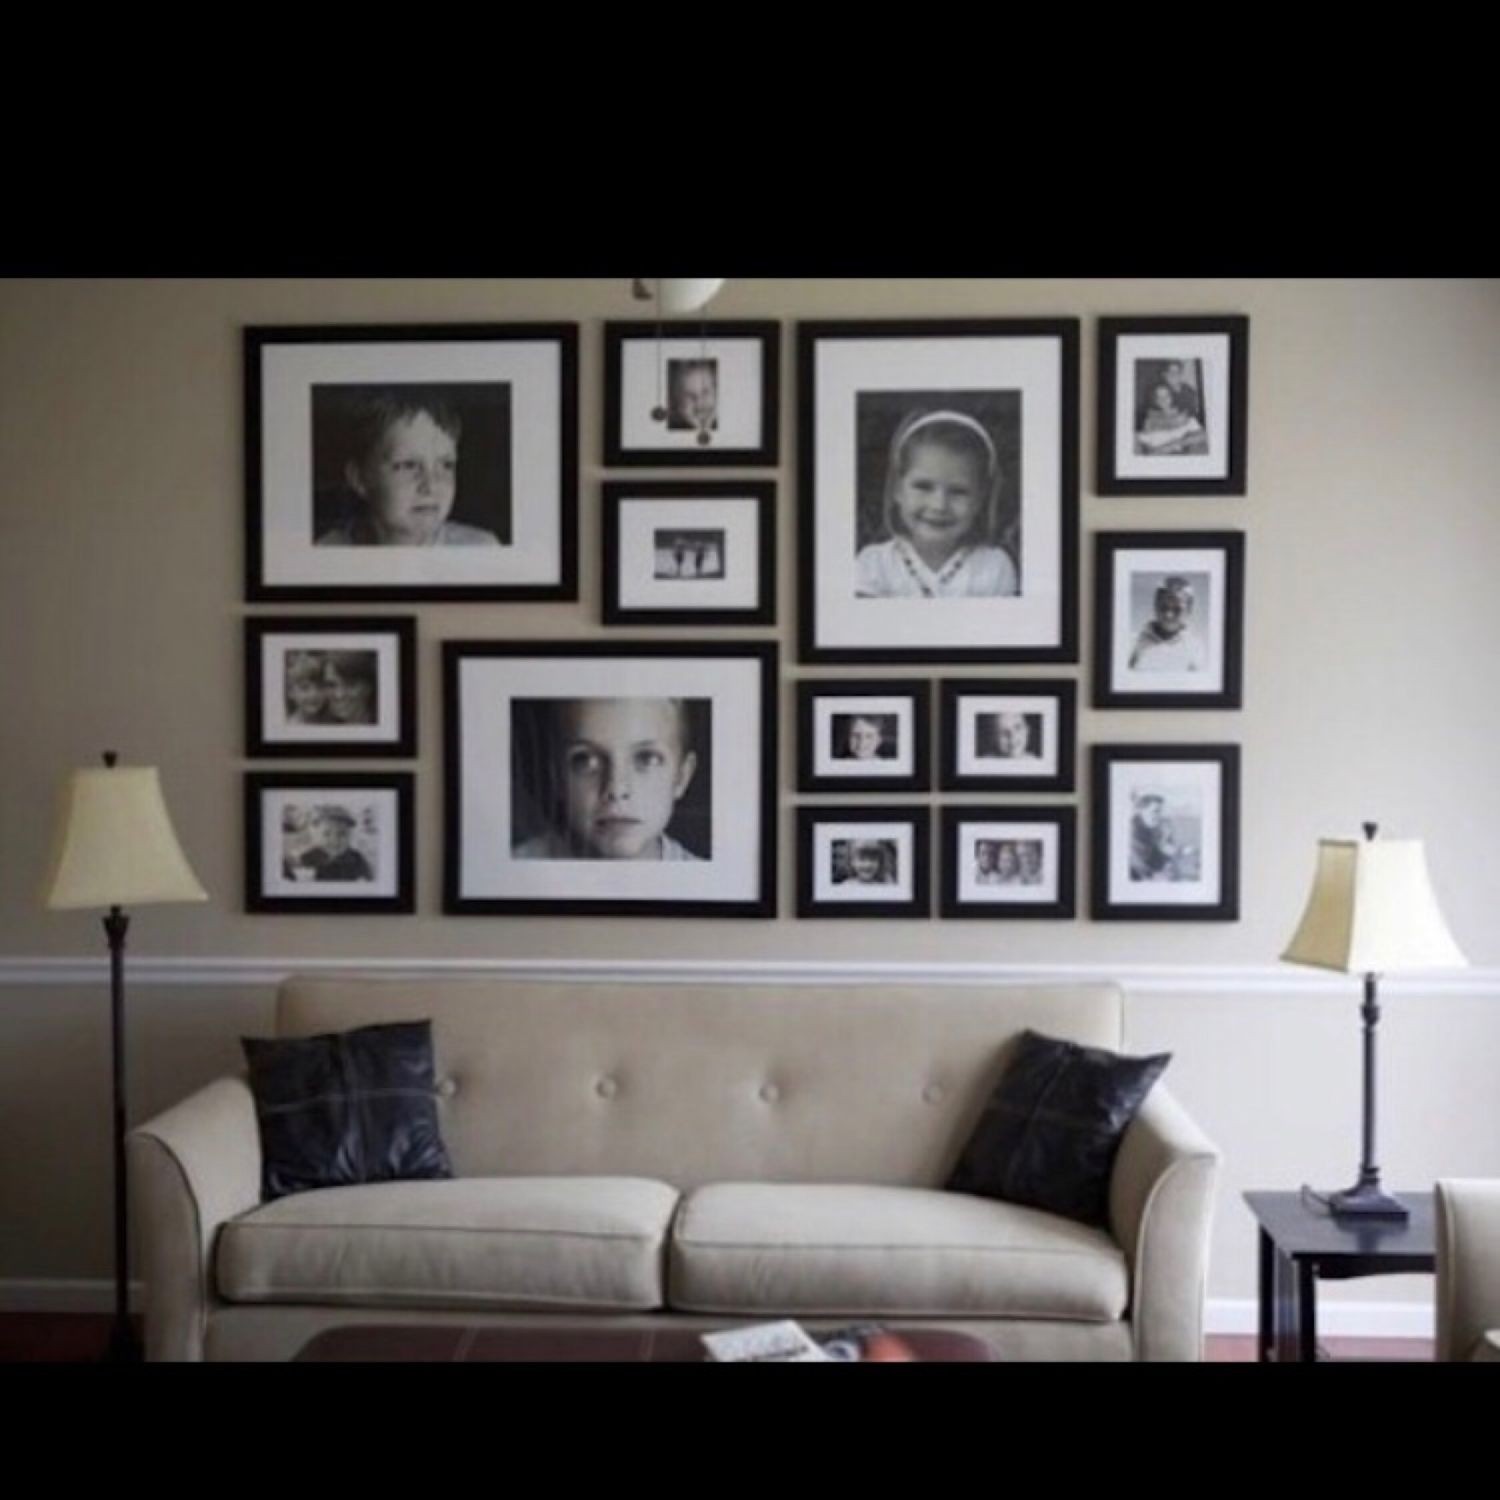 Large collage photo frames